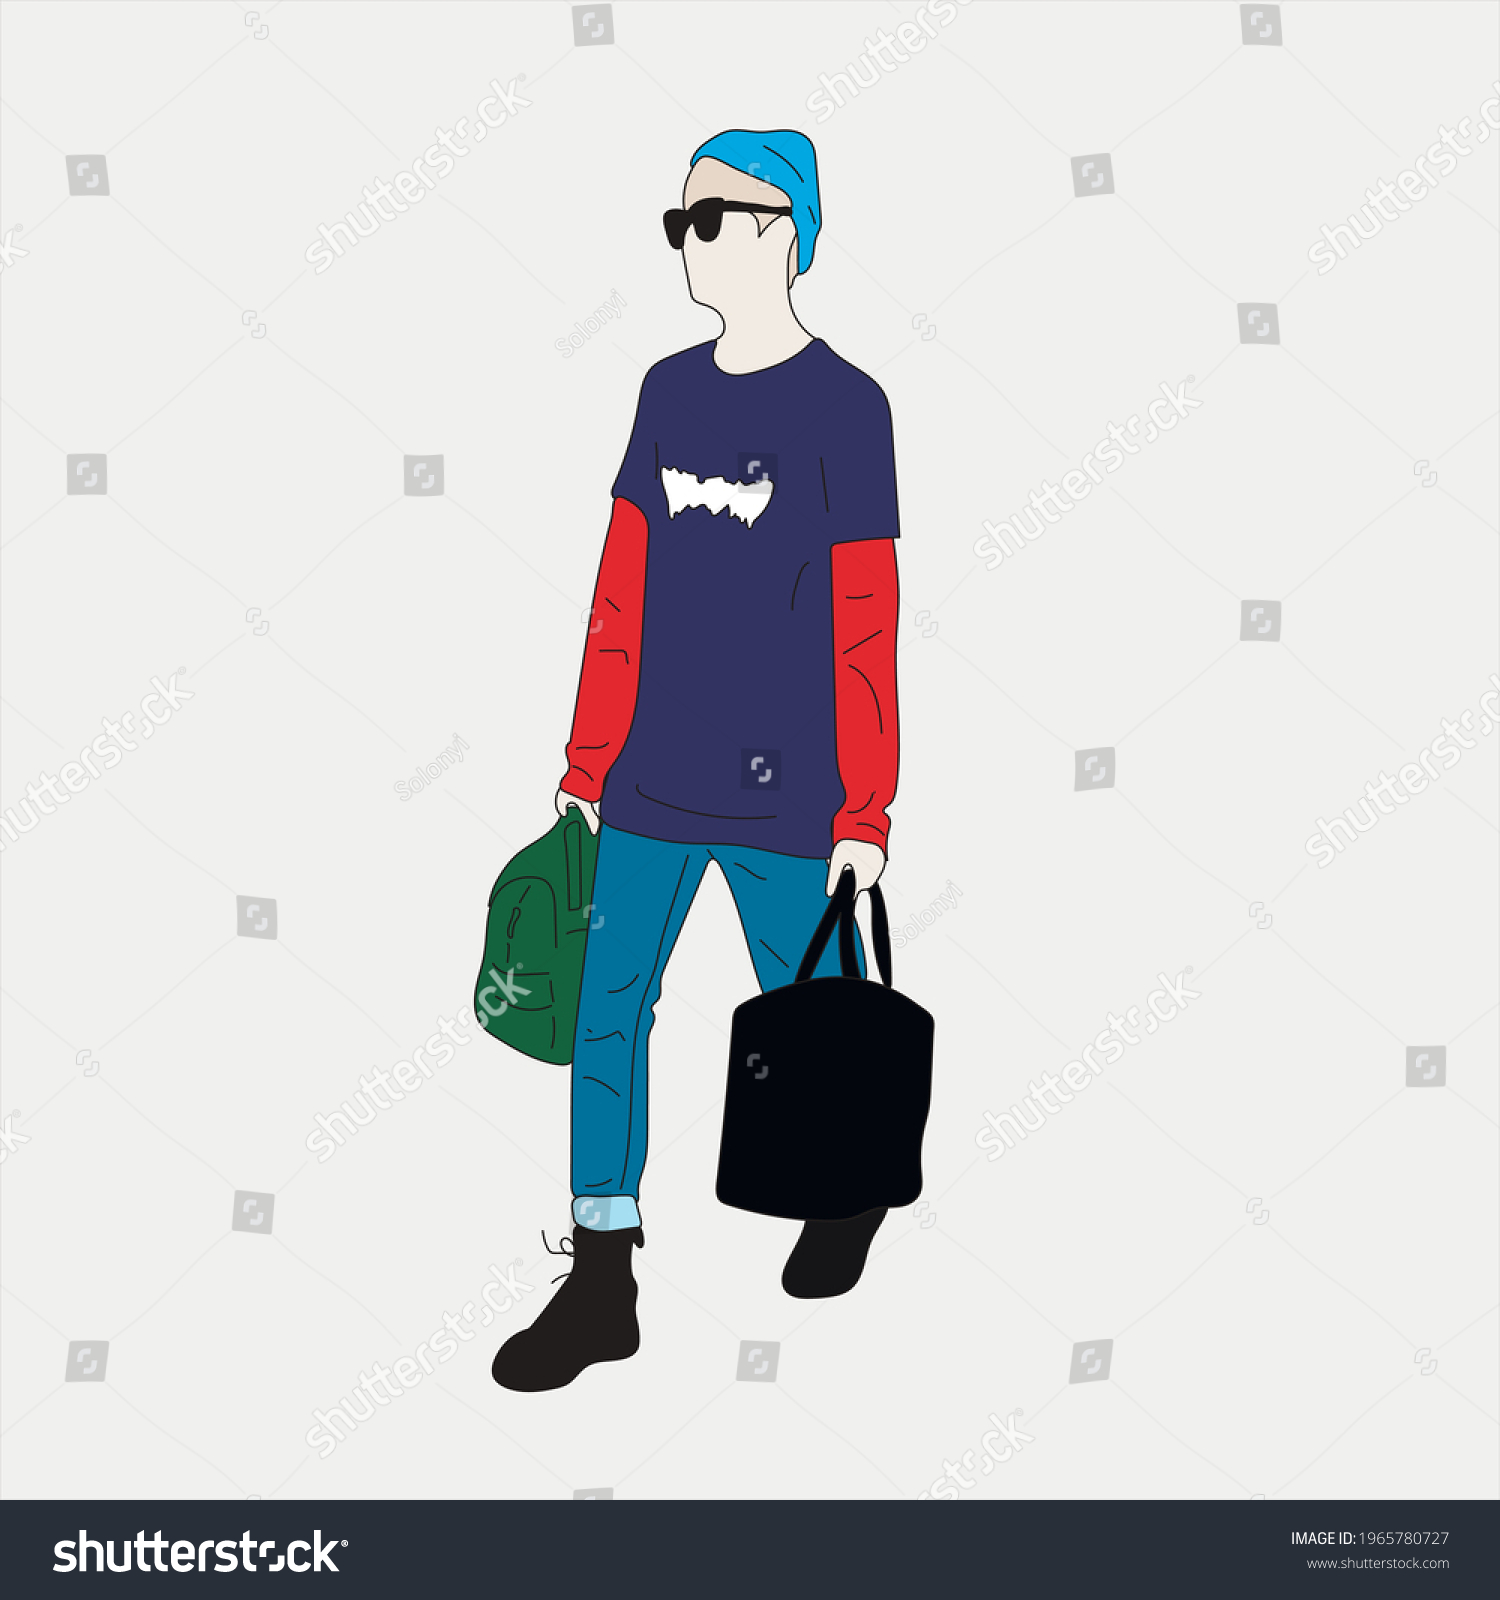 SVG of Vector illustration of Kpop street fashion. Street idols of Koreans. Kpop male fashion idol. A guy in blue jeans and a blue hoodie,with a black and green bag. svg